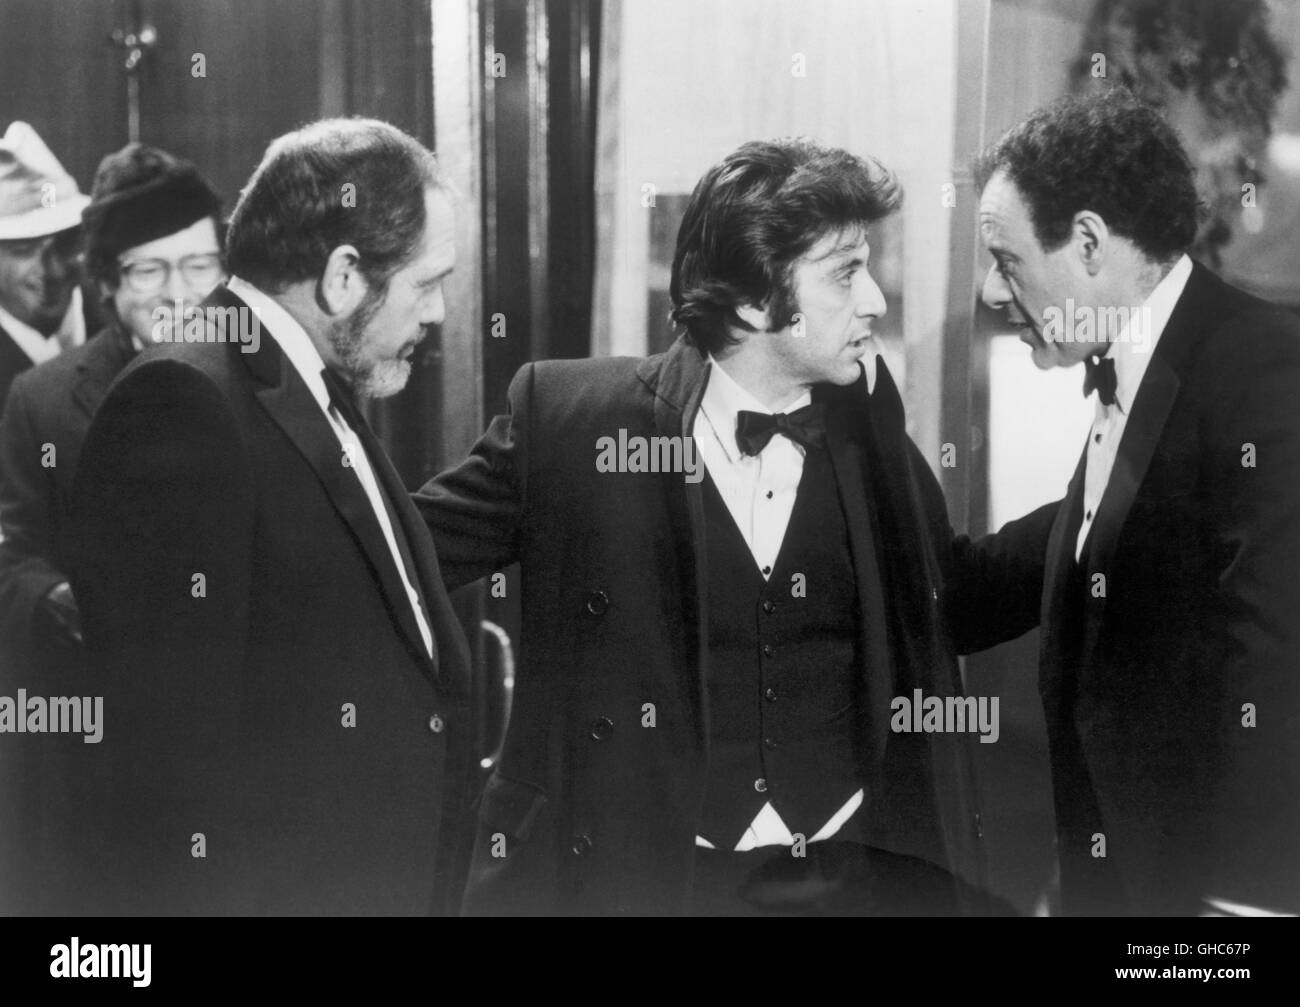 AUTHOR AUTHOR Author! Author! USA 1982 Arthur Hiller Playwright Ivan Travalian (AL PACINO), center, confers with the director of his play Finestein (BOB DISHY), right as nervous producer Kreplich (ALAN KING) listens attentively. Regie: Arthur Hiller aka. Author! Author! Stock Photo